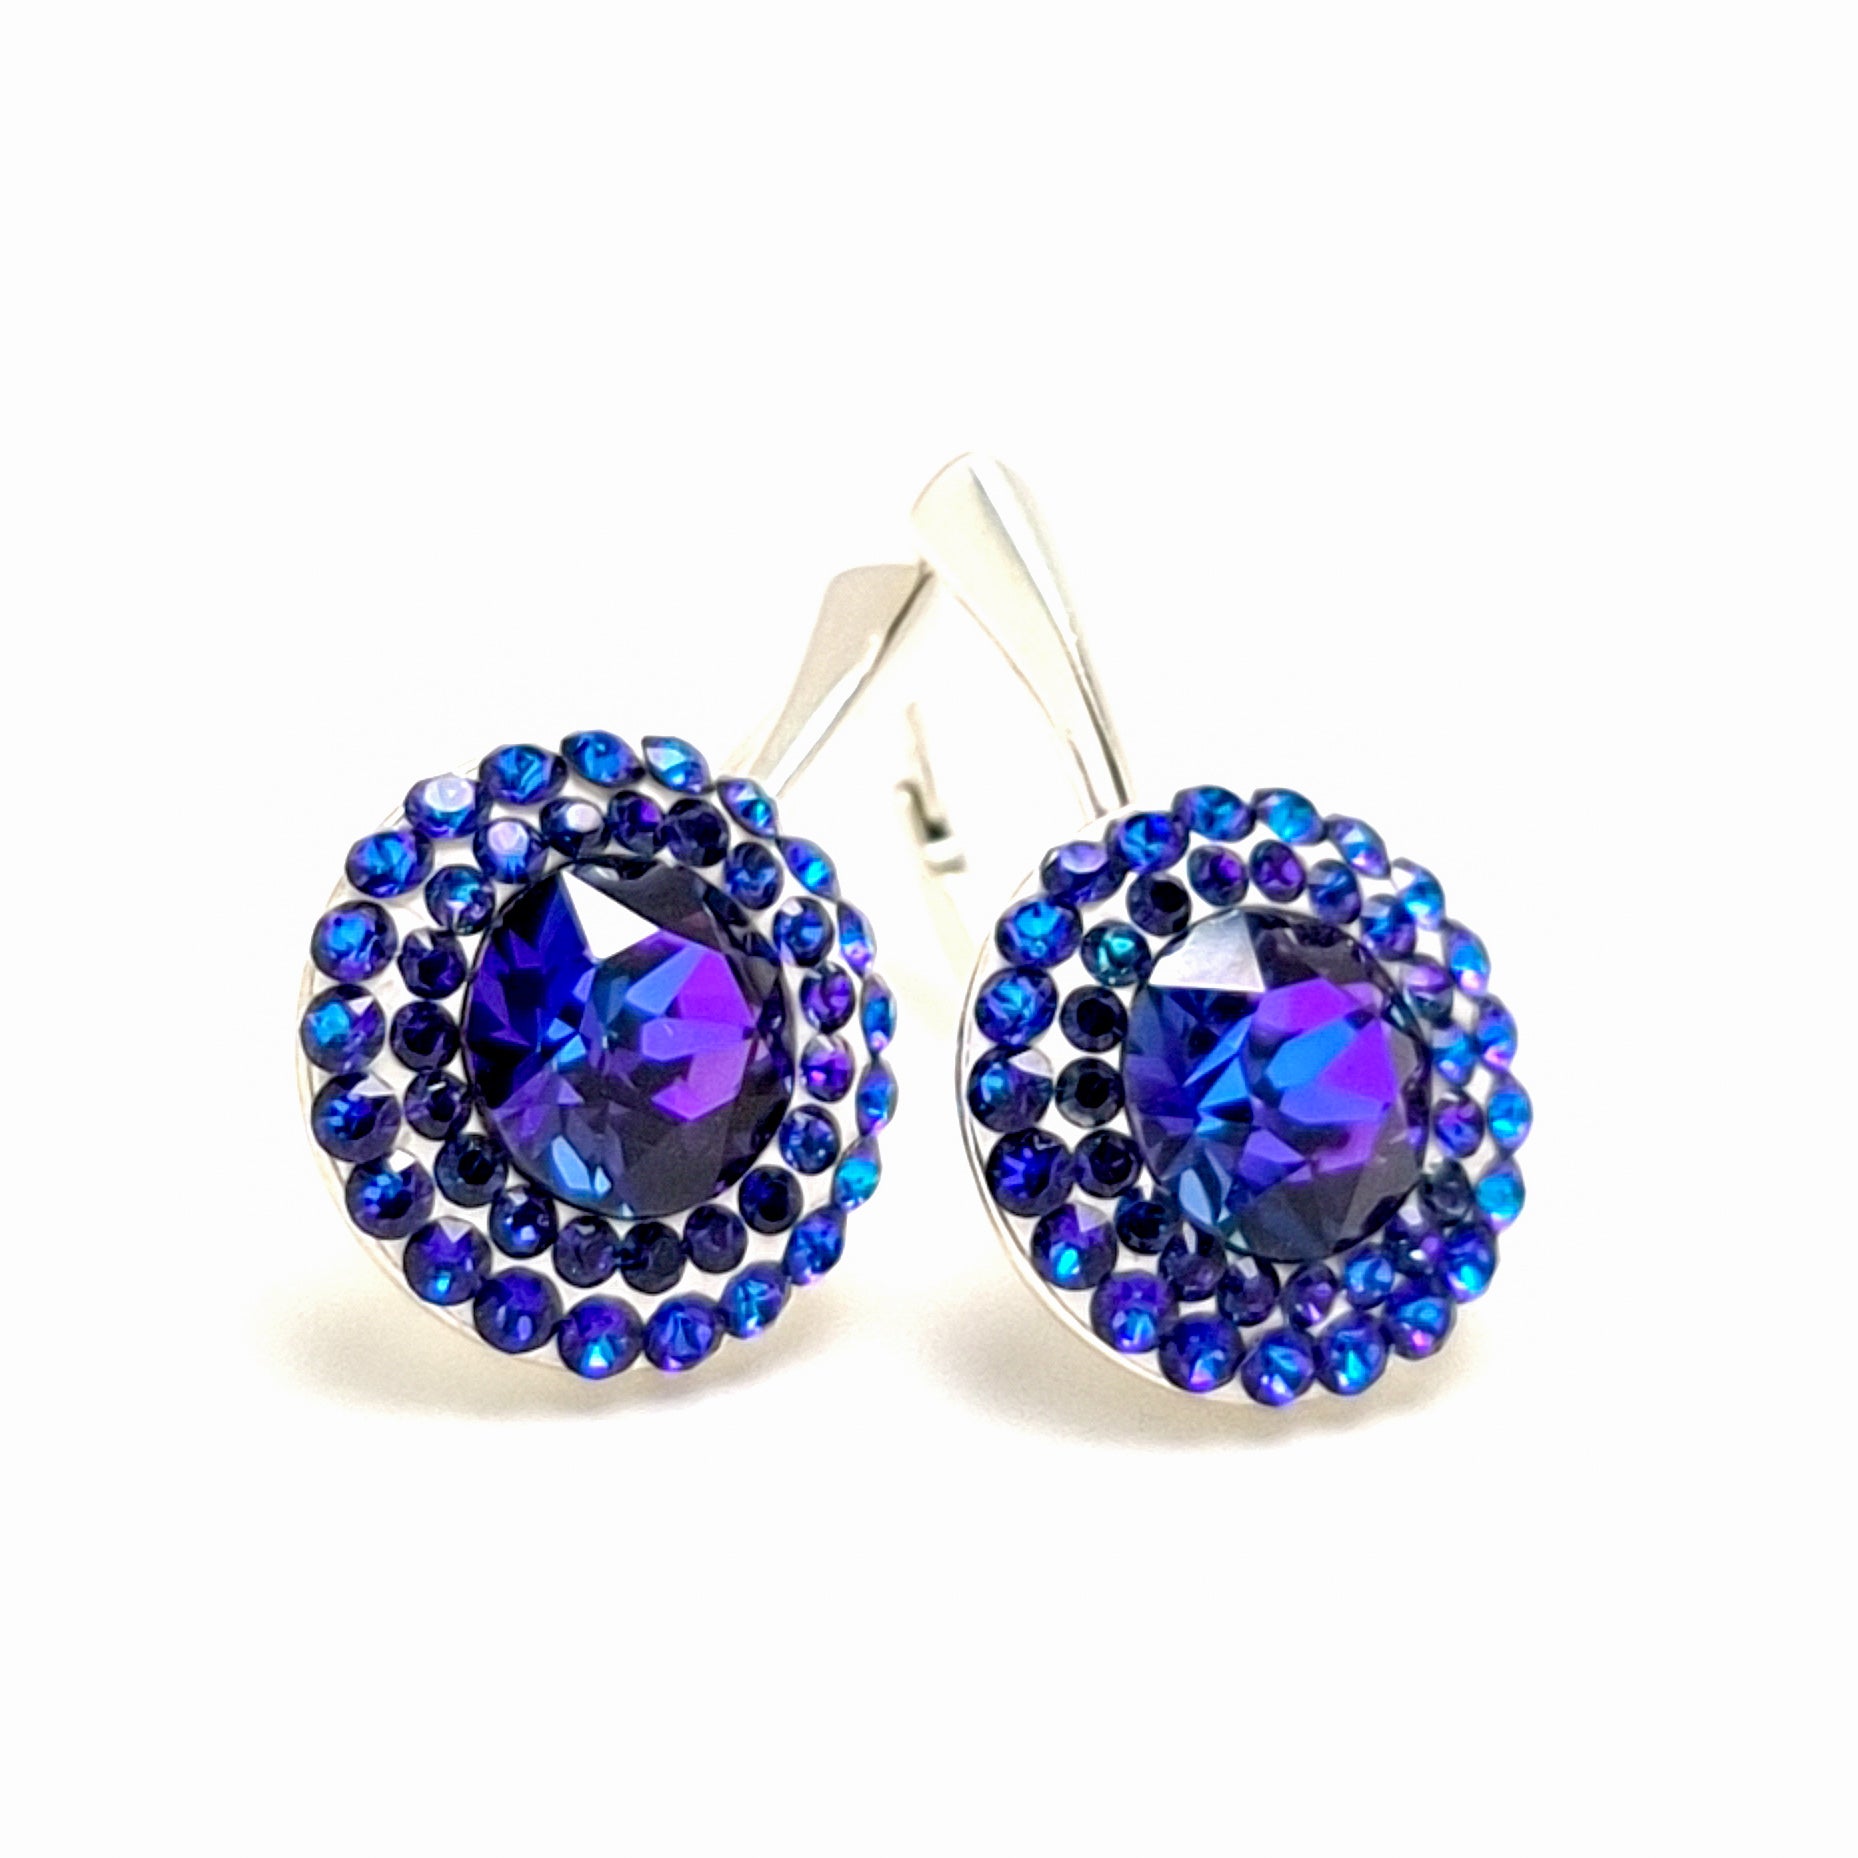 Irish Handcrafted Sterling Silver Heliotrope Pave Earrings with Double Halo